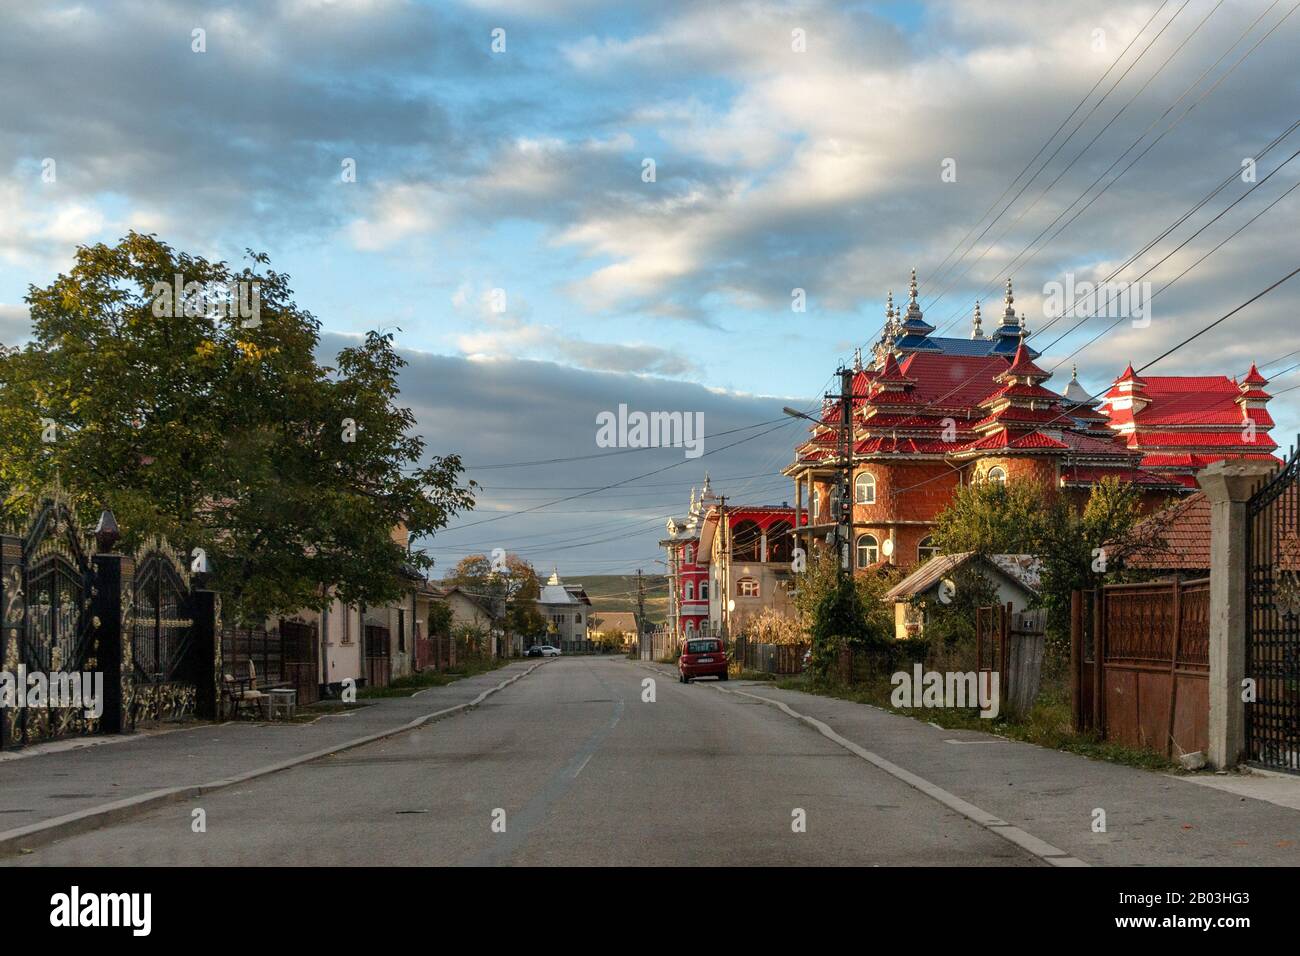 A street in Huedin, Romania with Roma mansions on it Stock Photo